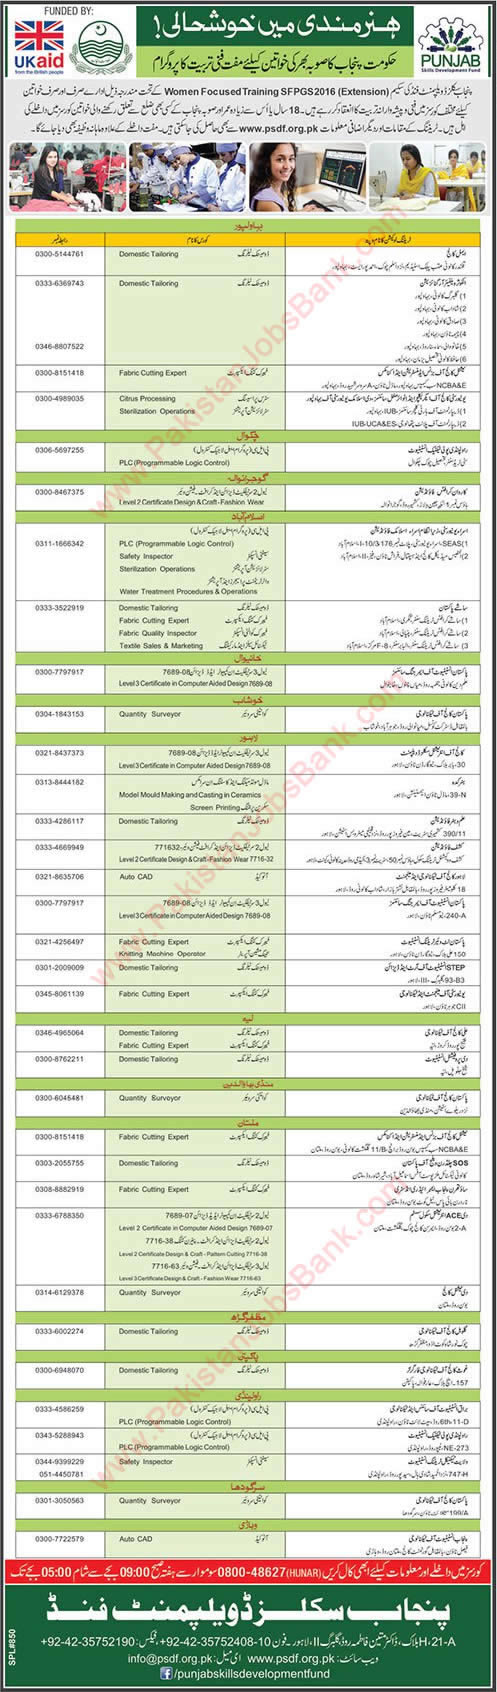 PSDF Free Courses March 2017 in Punjab for Females with Stipend / Salary Latest